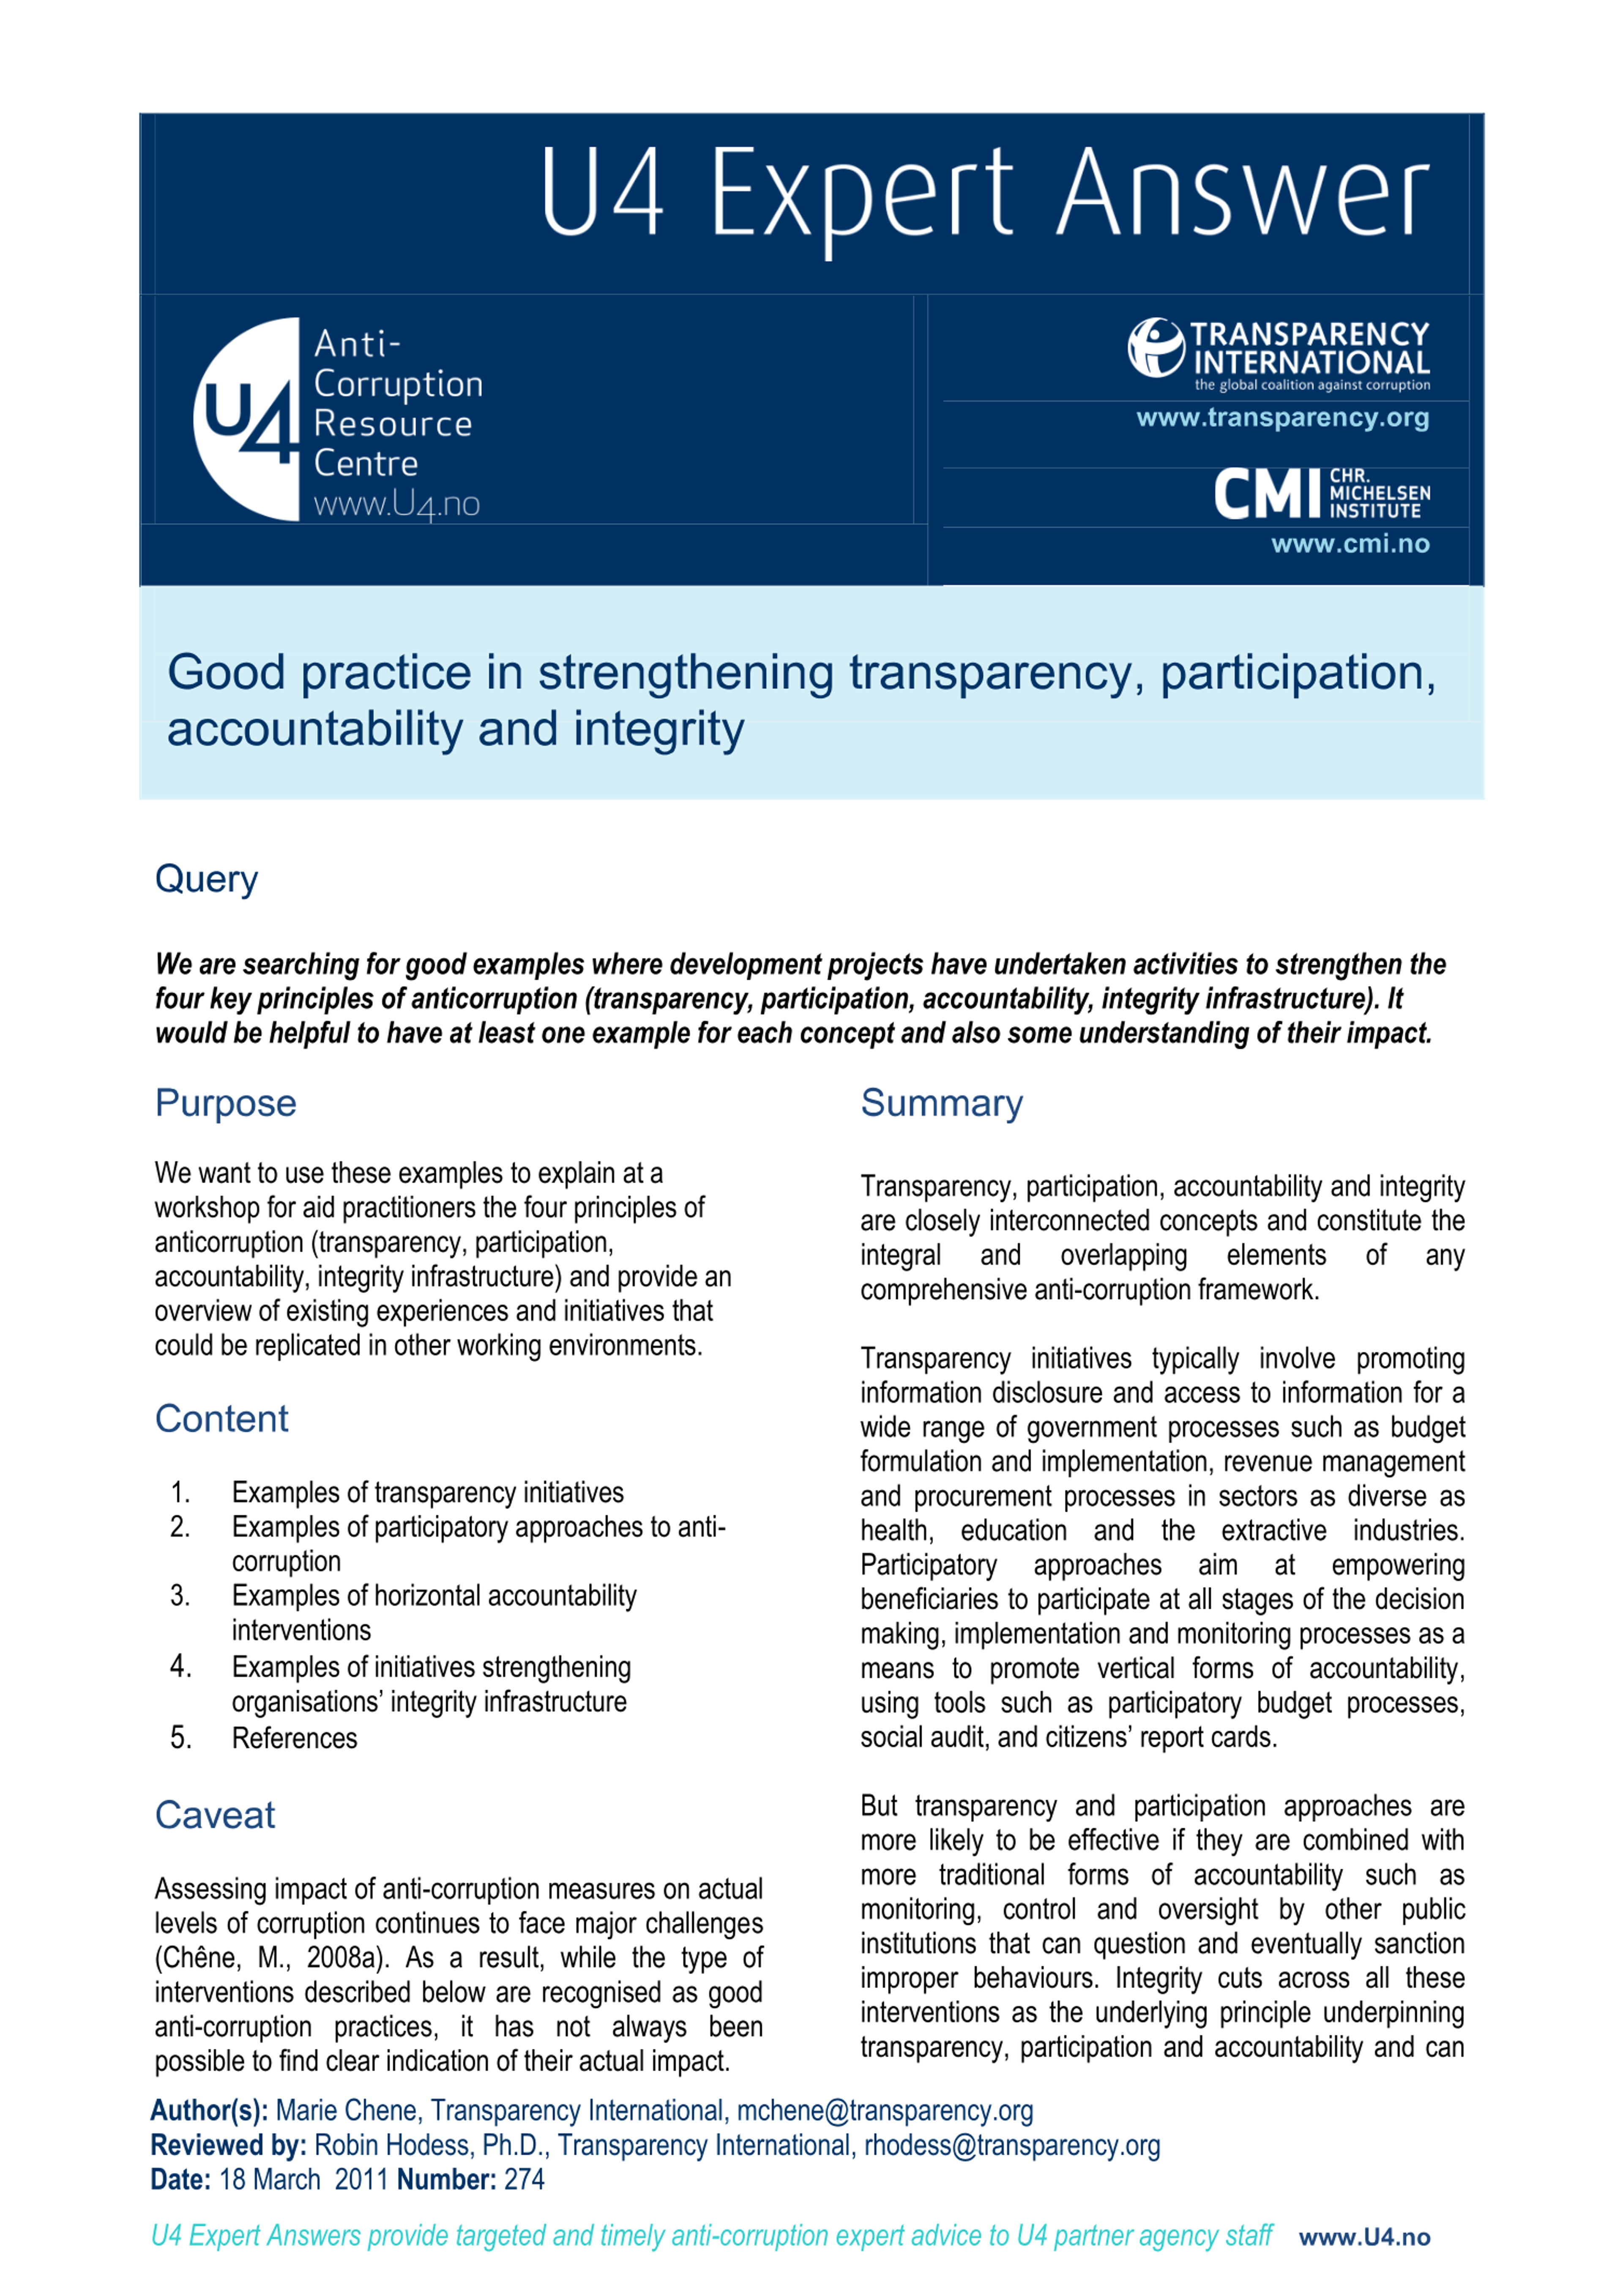 Good practice in strengthening transparency, participation, accountability and integrity